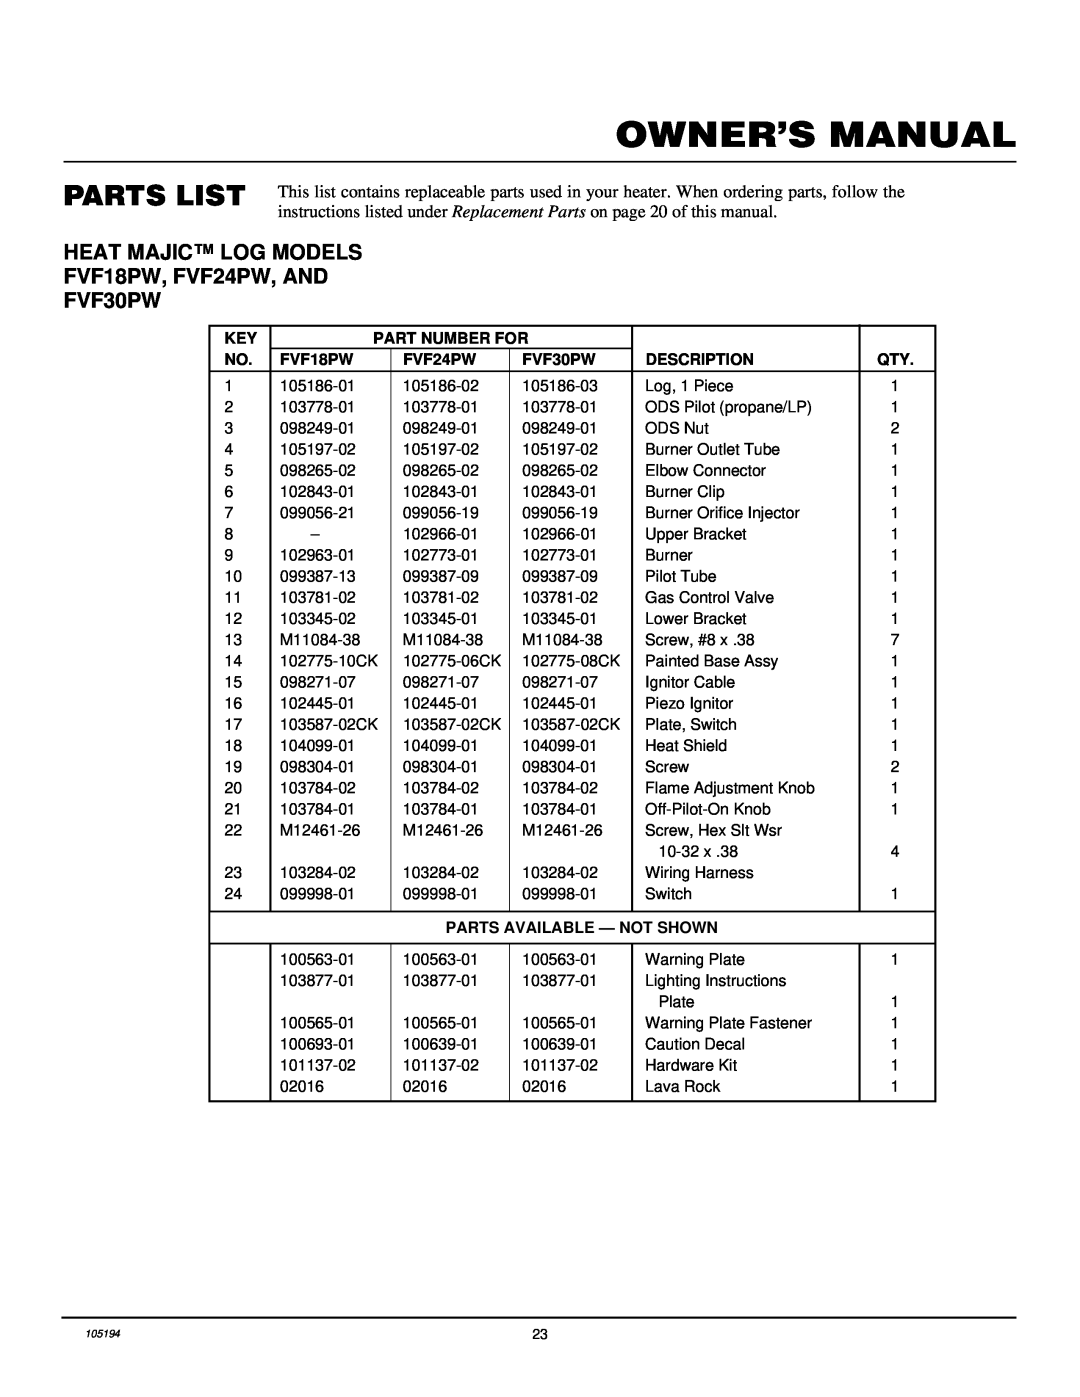 FMI FVF30PW Parts List, Heat Majic Log Models, FVF18PW, FVF24PW, AND, Owner’S Manual, Part Number For, Description 